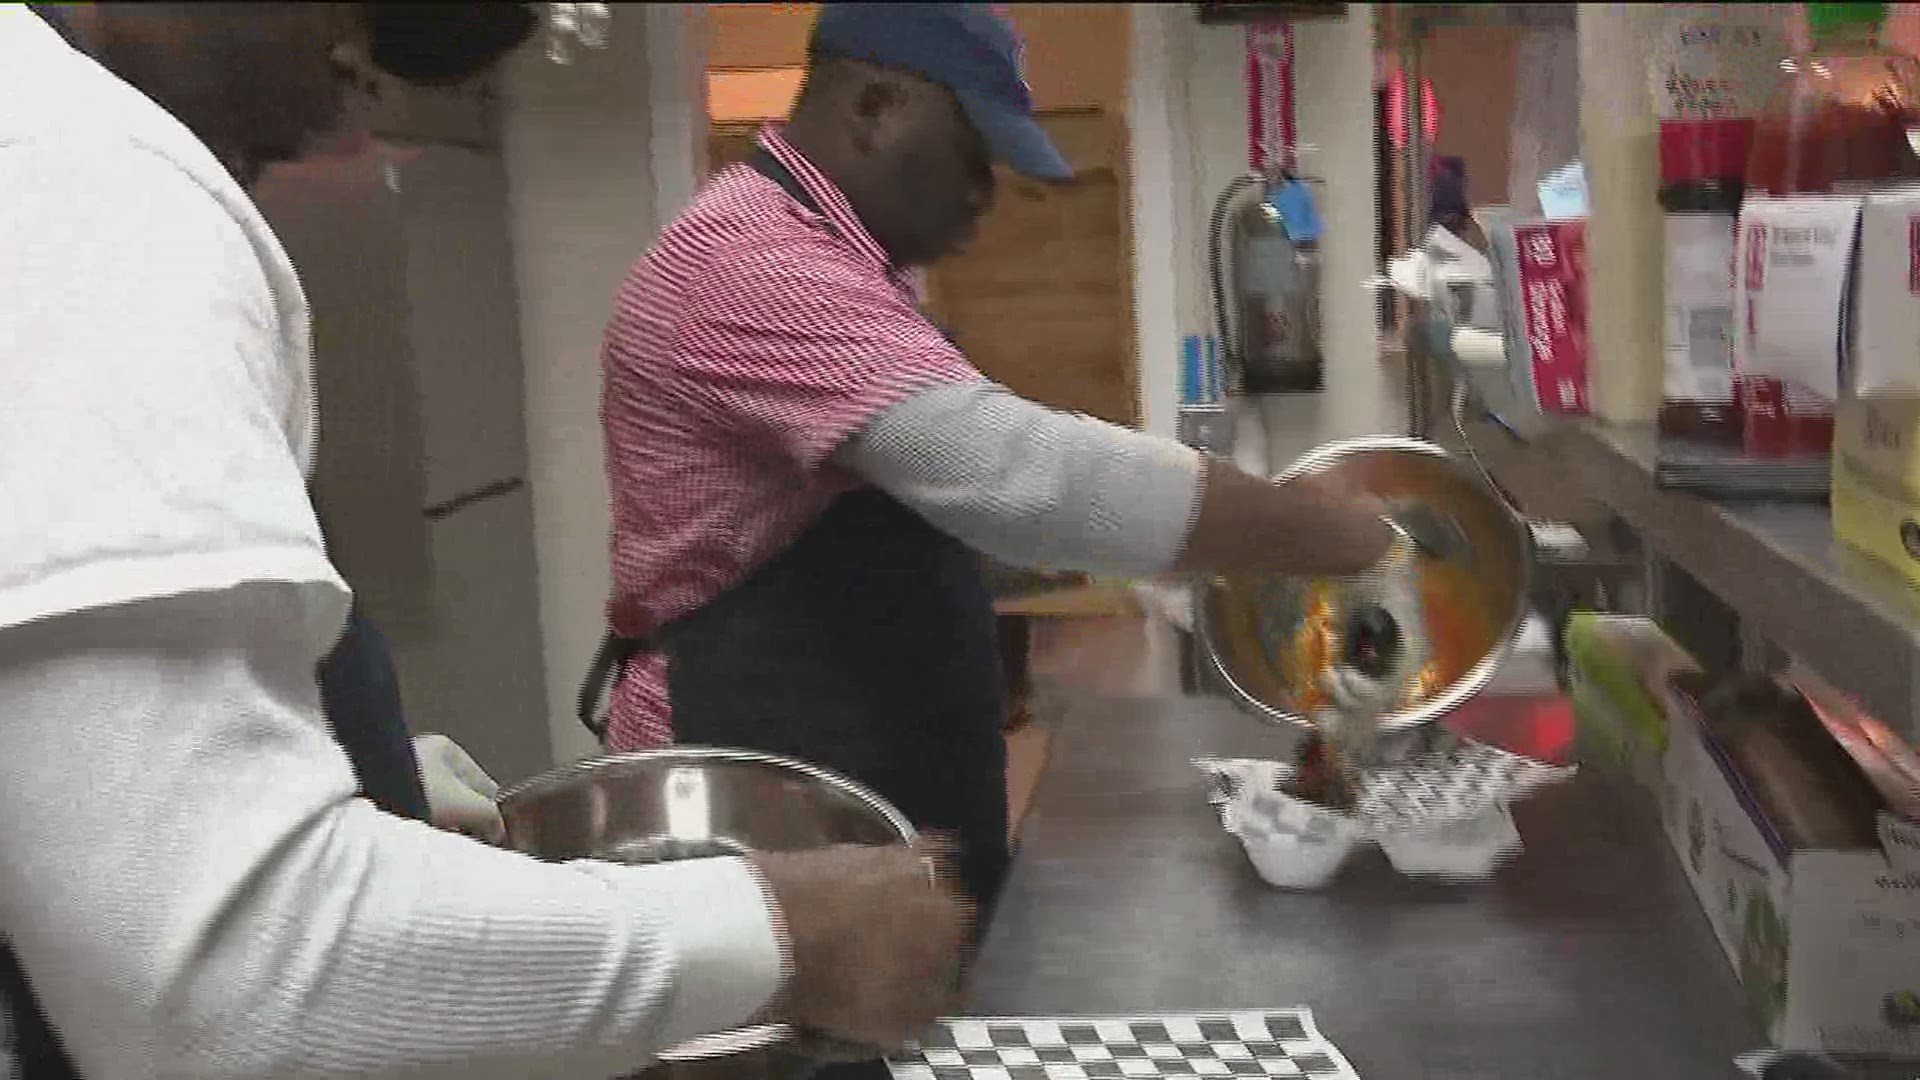 Police chief turned chef in the Poconos | wnep.com